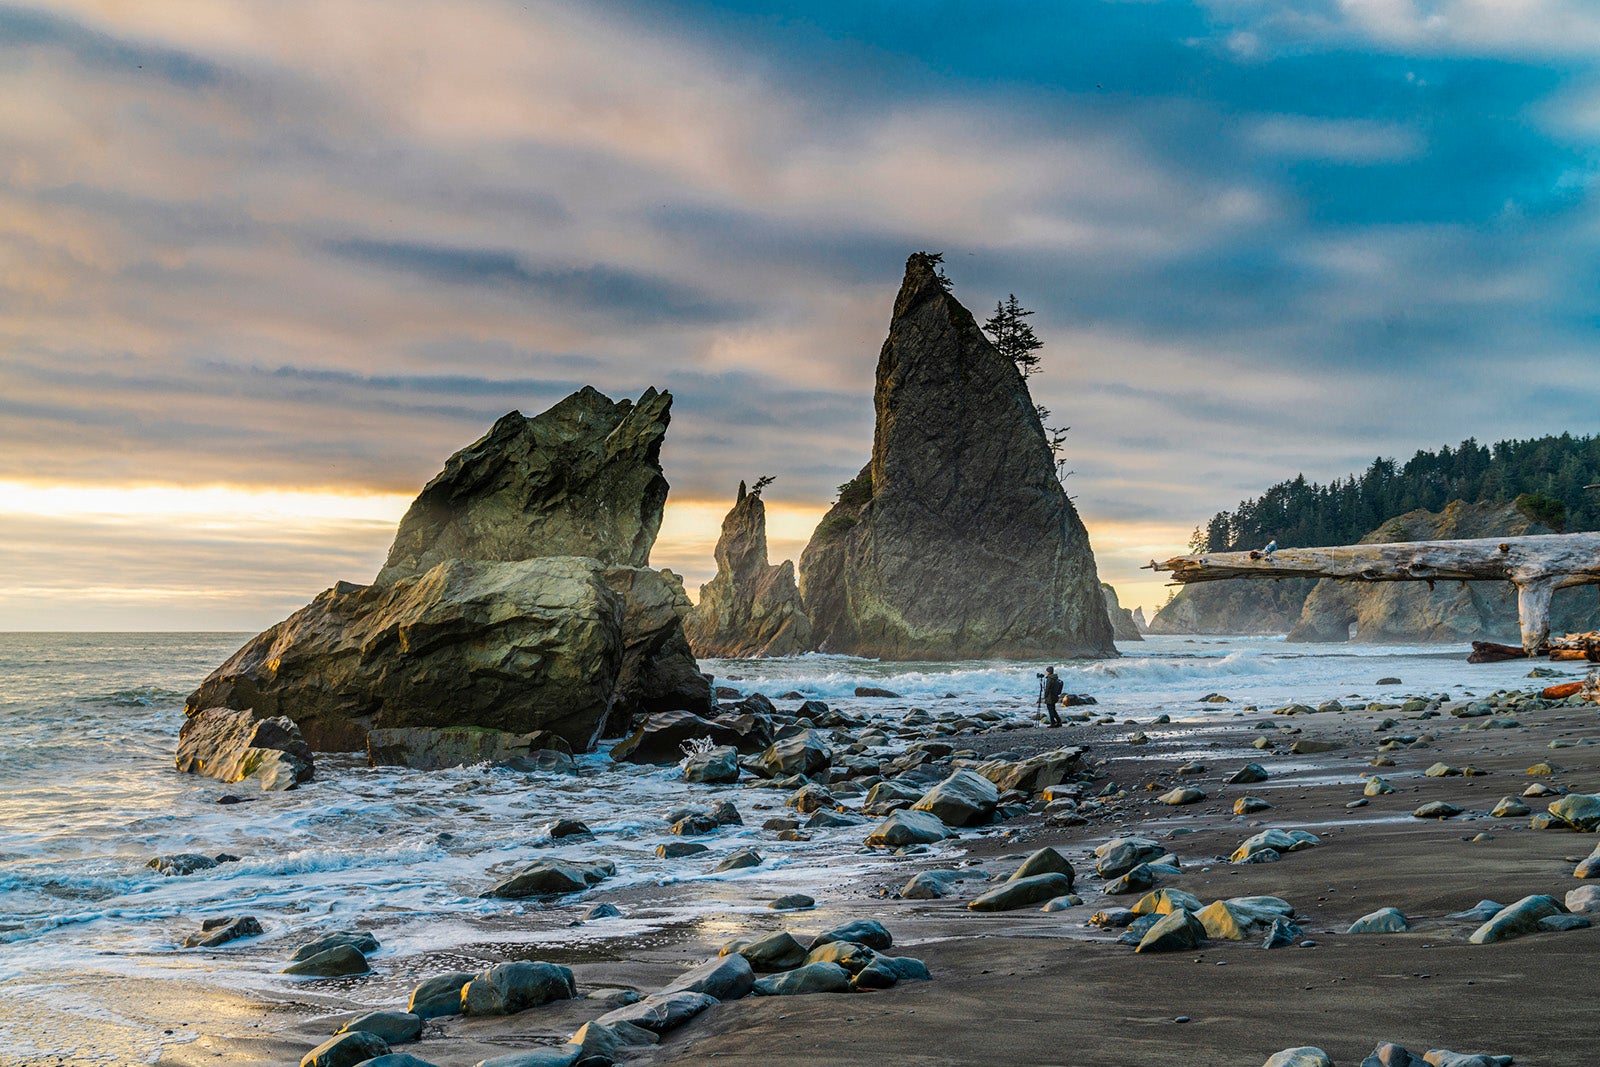 Pacific Northwest road trip: The San Juan Islands and Olympic National Park